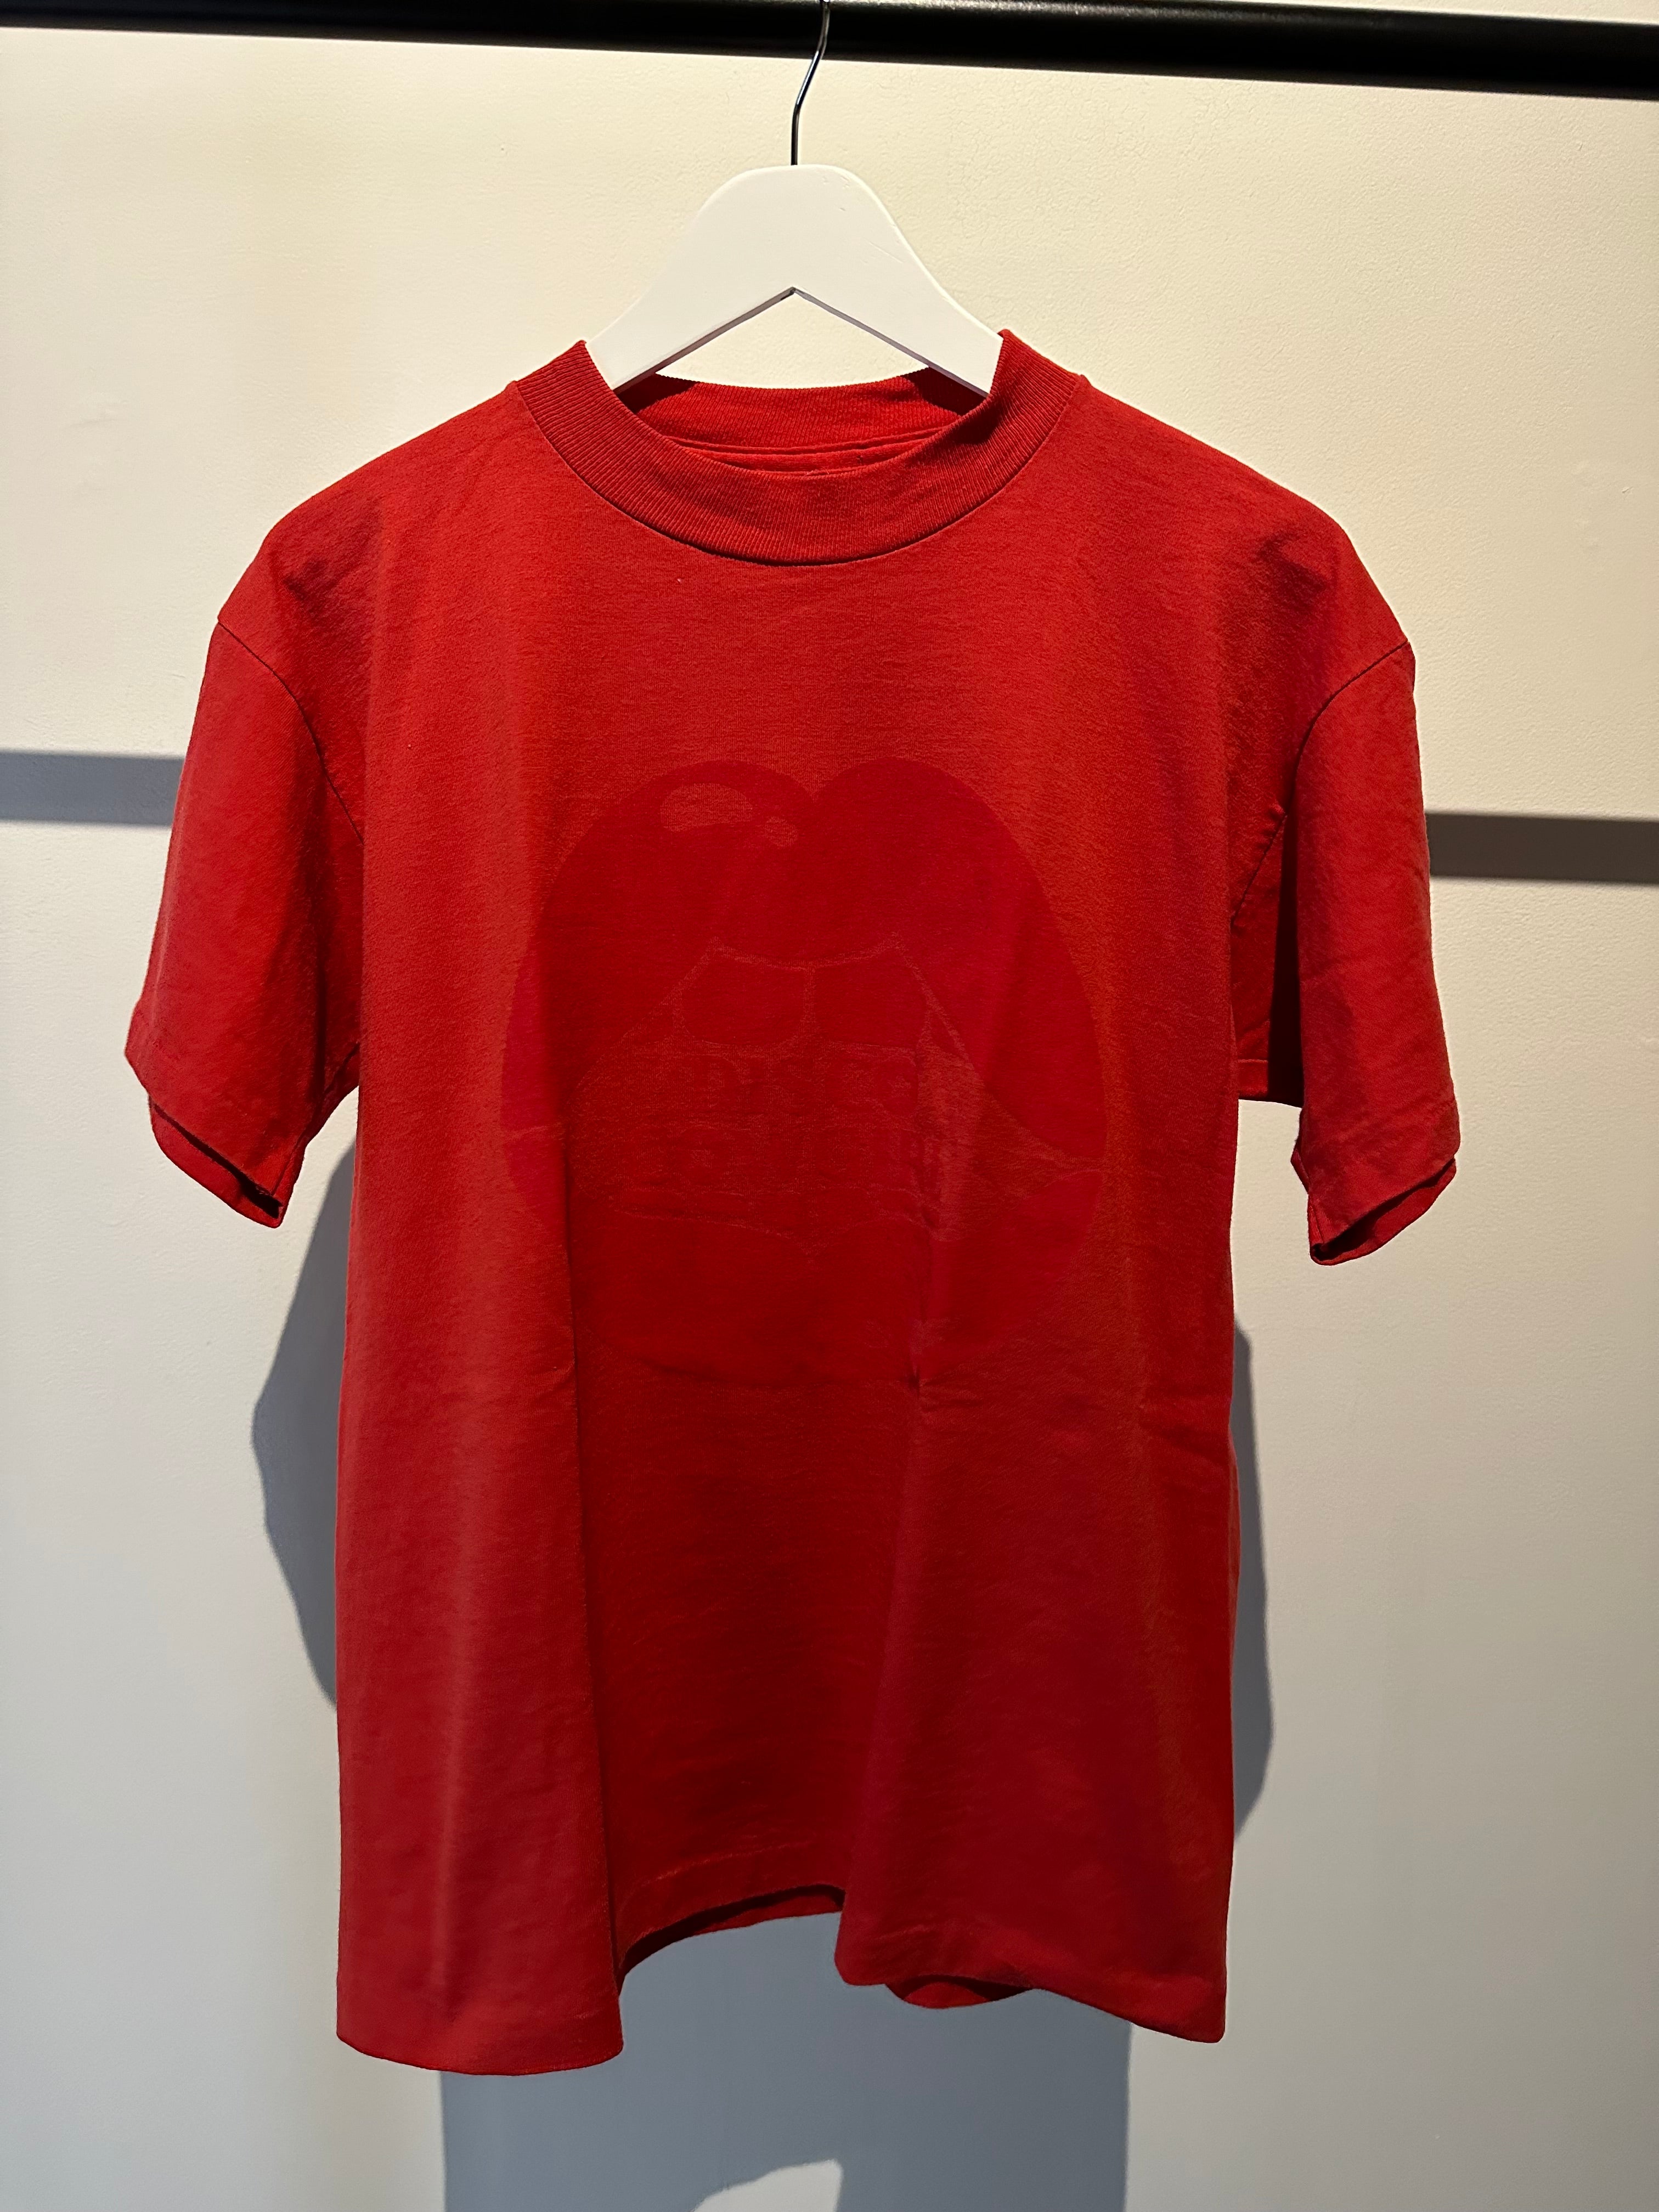 Vintage Kiss Tee- red on red